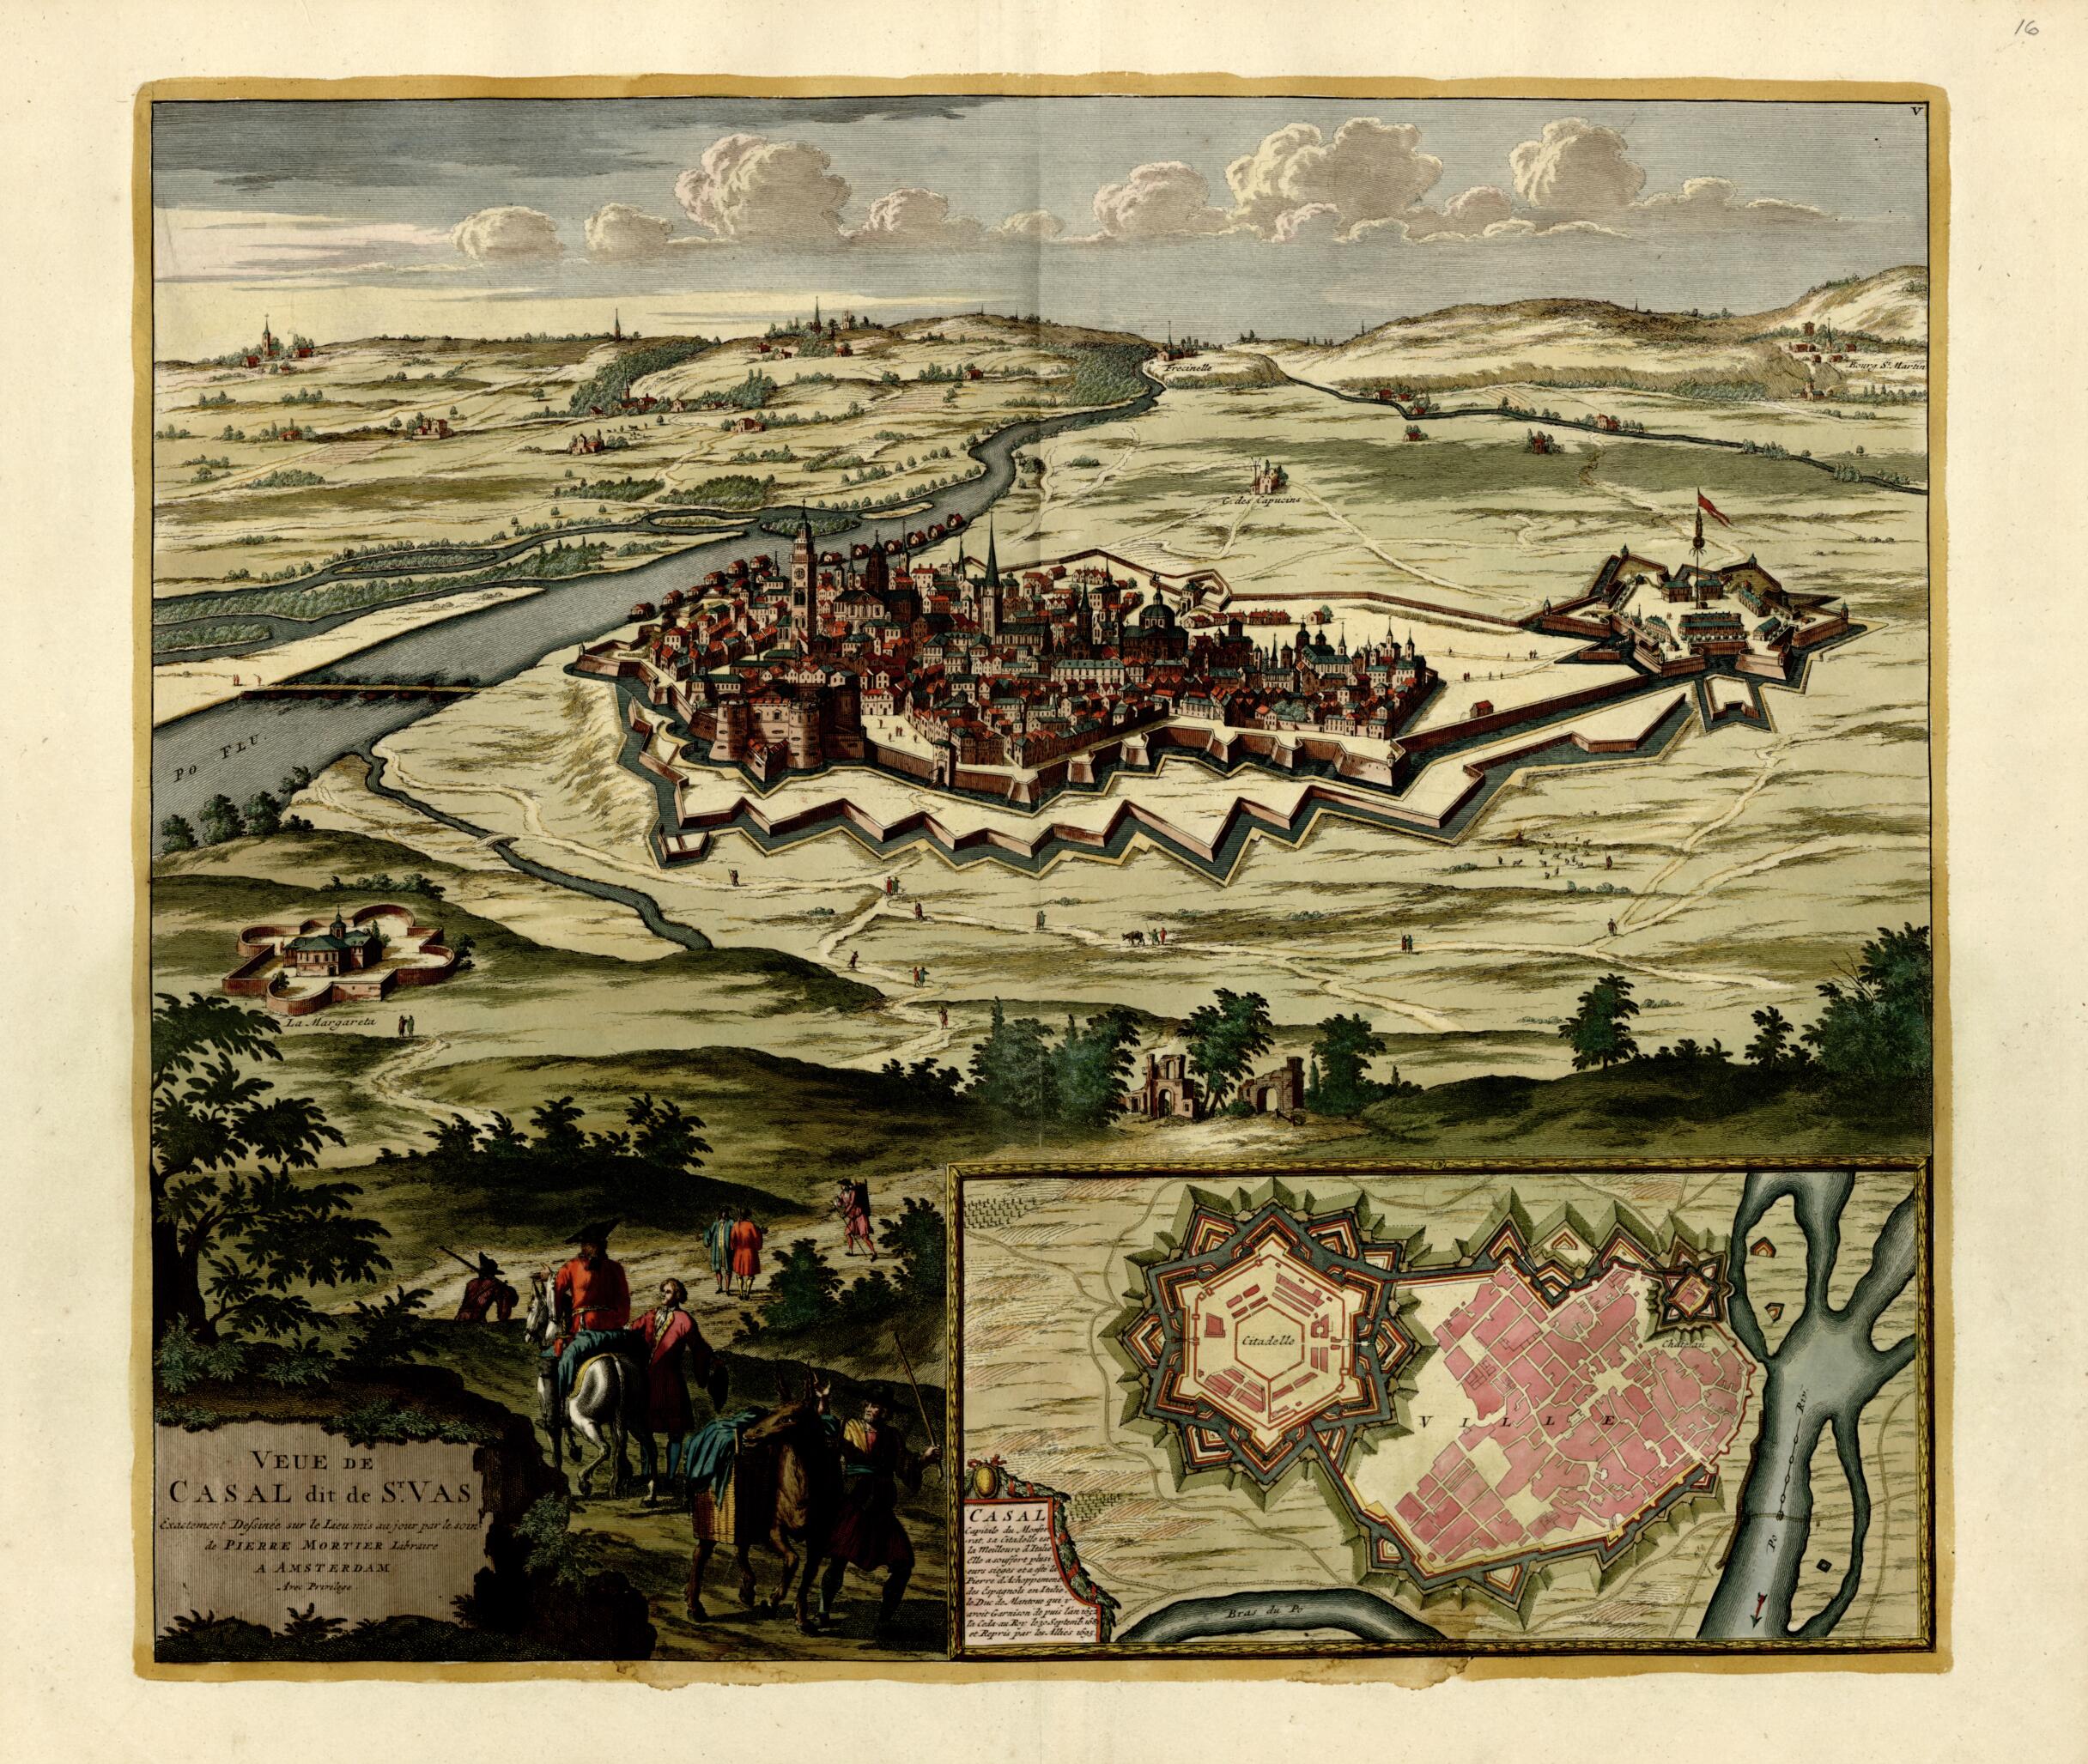 This old map of Veue De Casal Dit De St. Vas Dessinee Sur Lieu Mis Au Jour from a Collection of Plans of Fortifications and Battles, 1684-from 1709 from 1709 was created by Anna Beeck in 1709